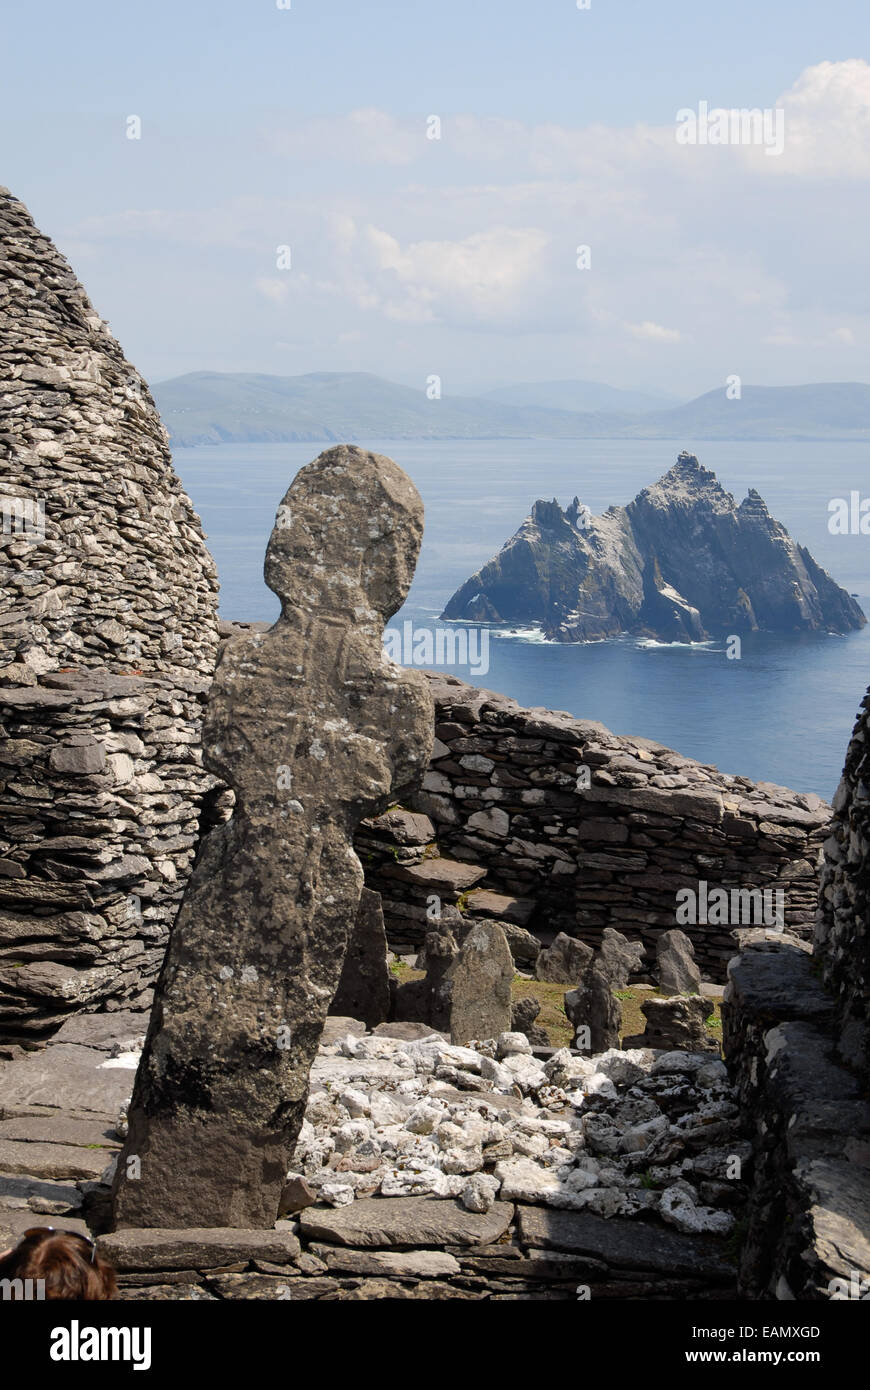 the famous island of skellig micheal in ireland Stock Photo